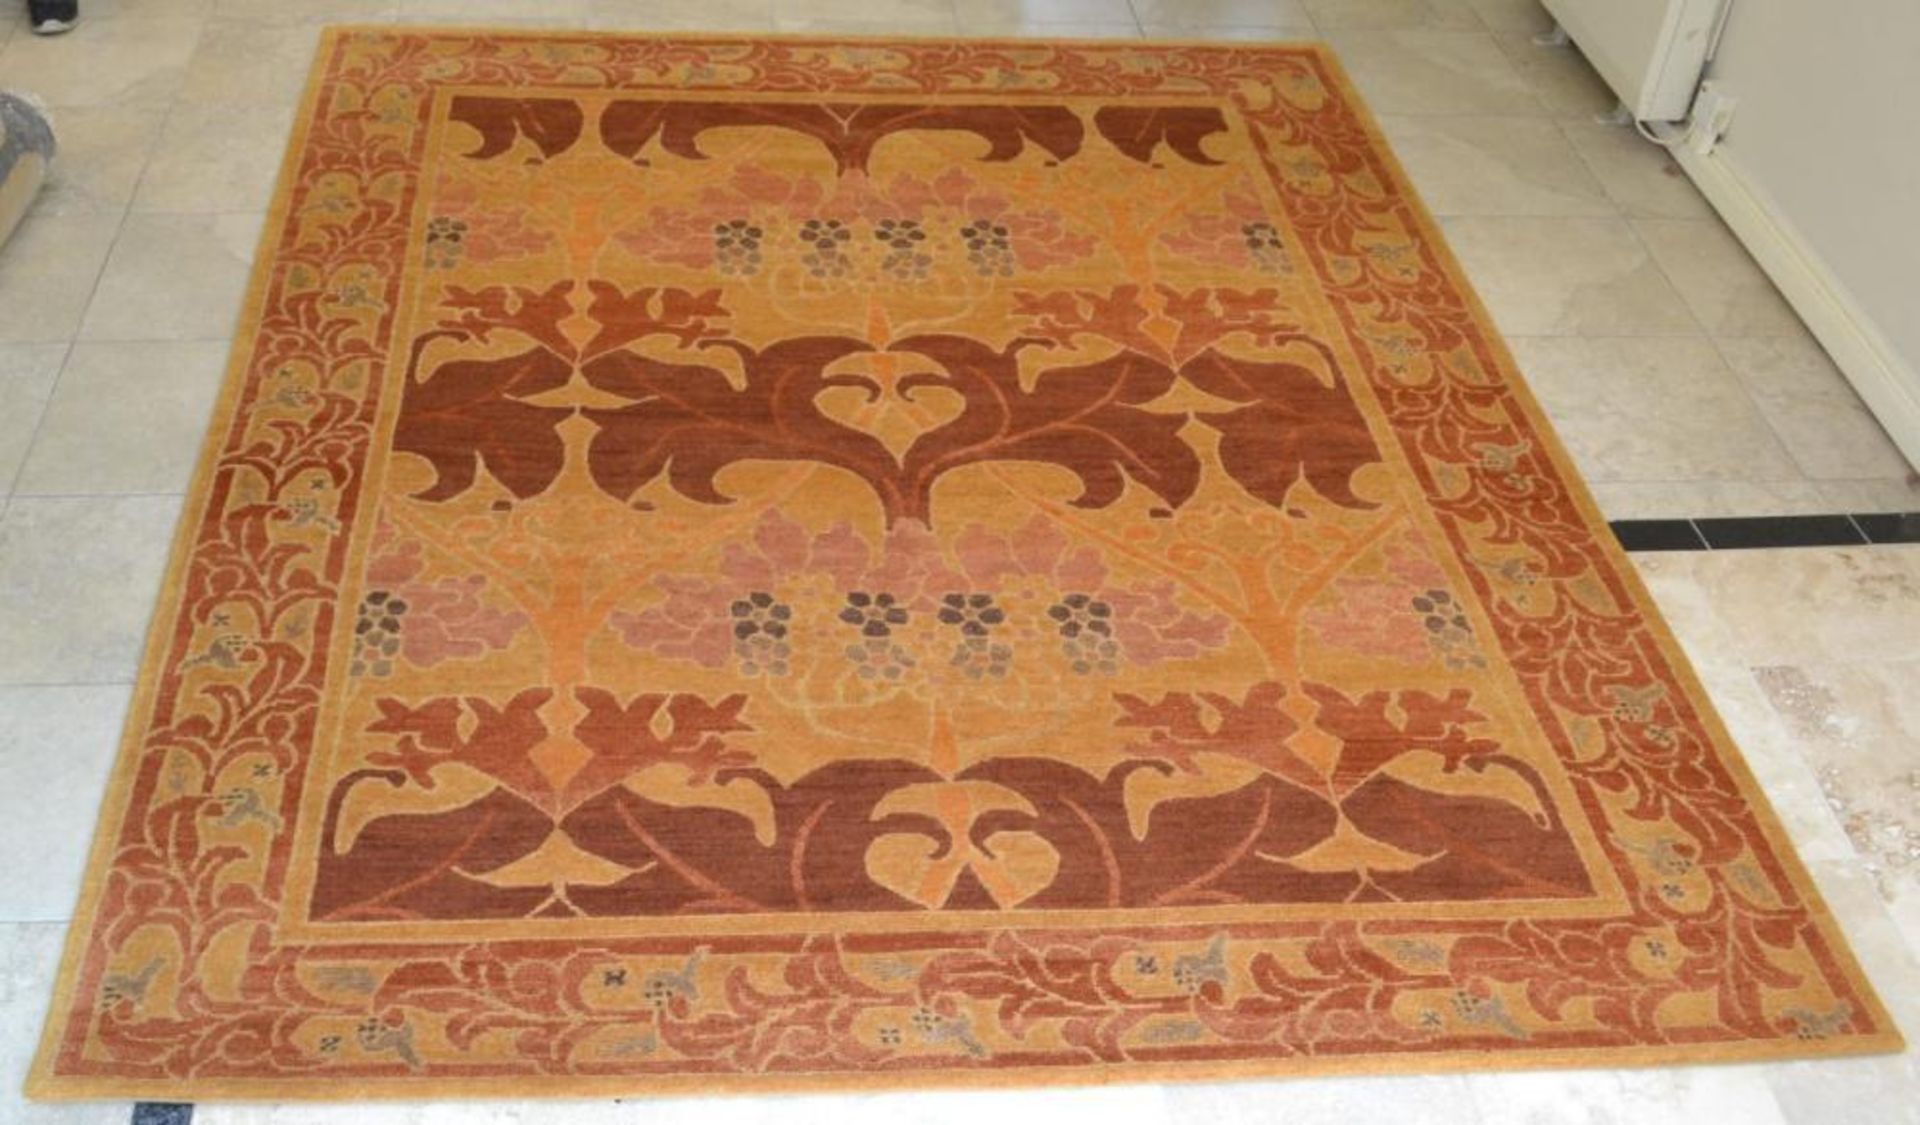 1 x Nepalese Terracotta Arts & Crafts Design Hand Knotted Rug - 100% Handspun Wool - Dimensions: - Image 12 of 18